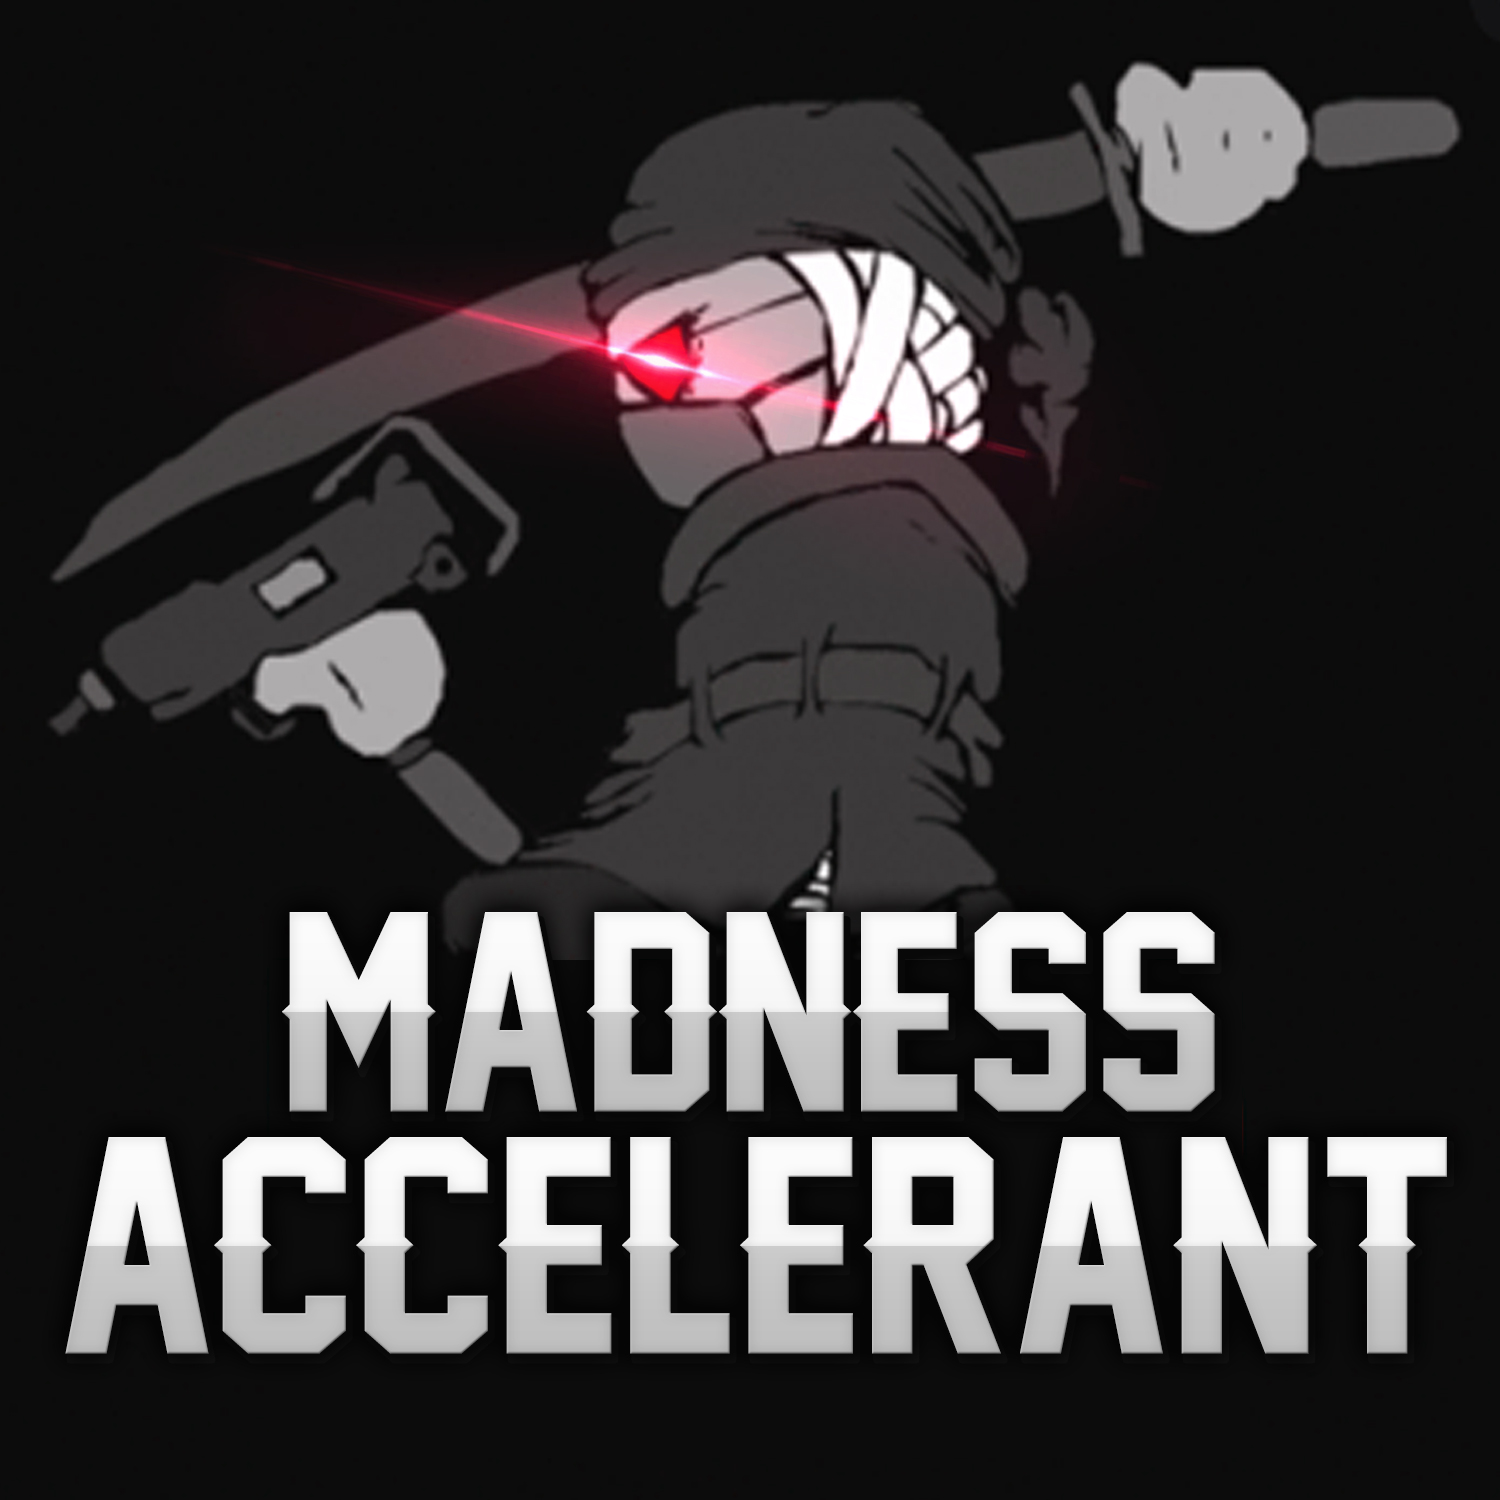 madness accelerant (200 subscribers) 